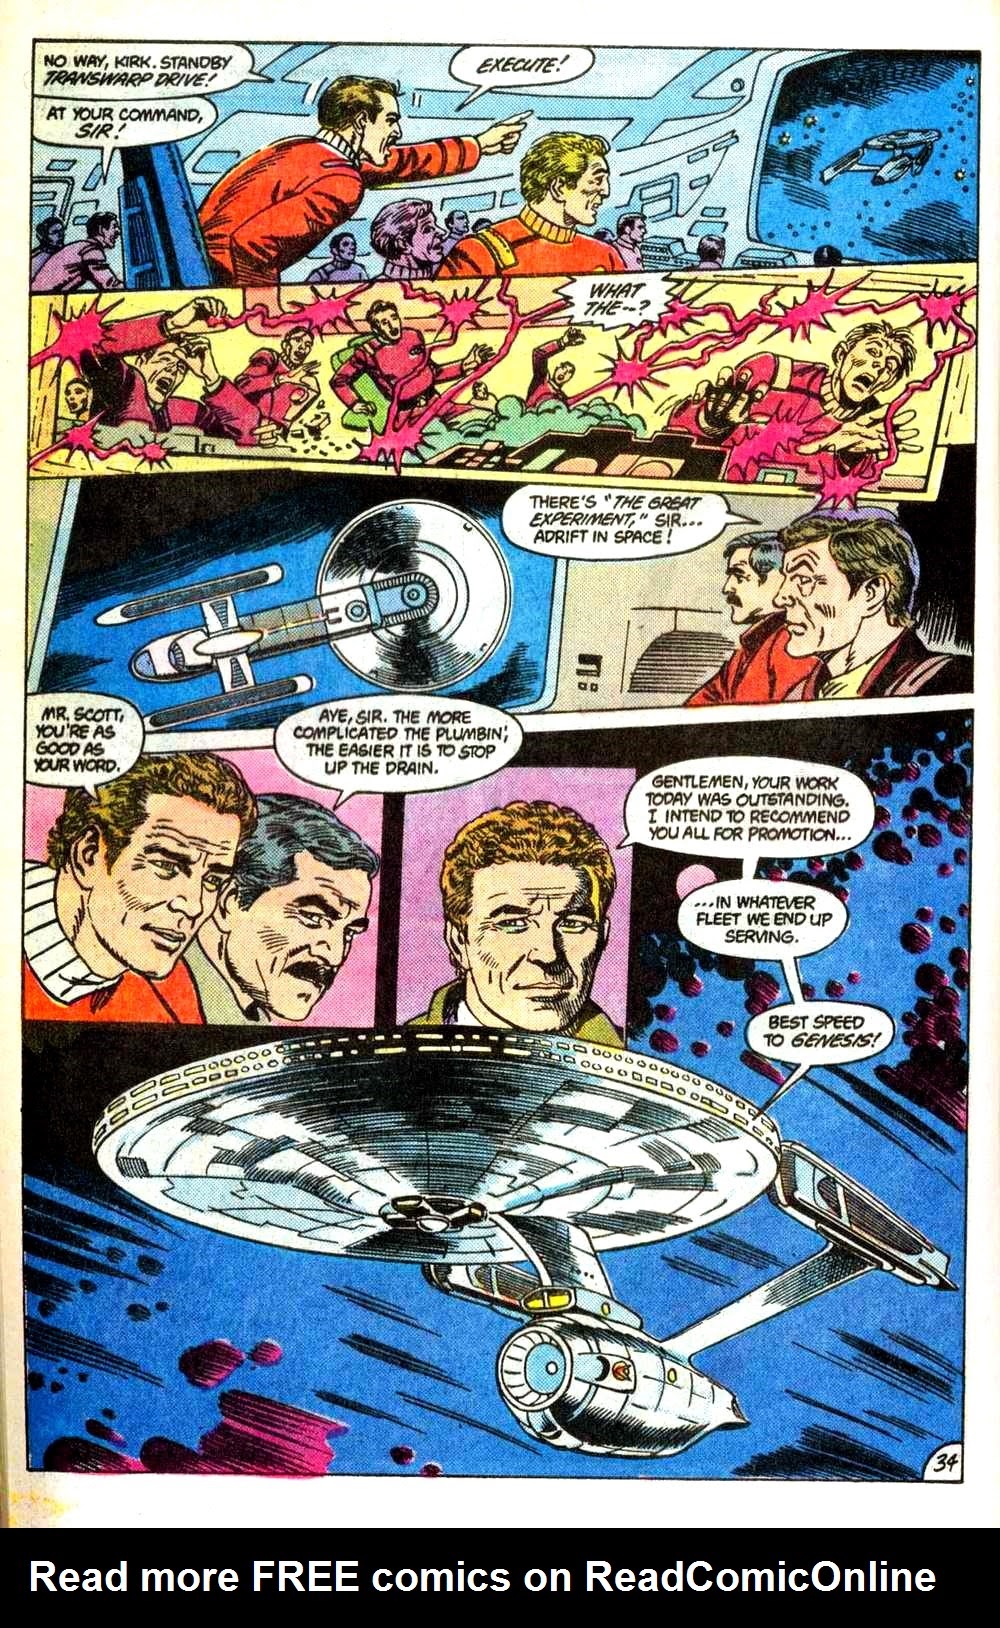 Read online Star Trek III: The Search for Spock comic -  Issue # Full - 36